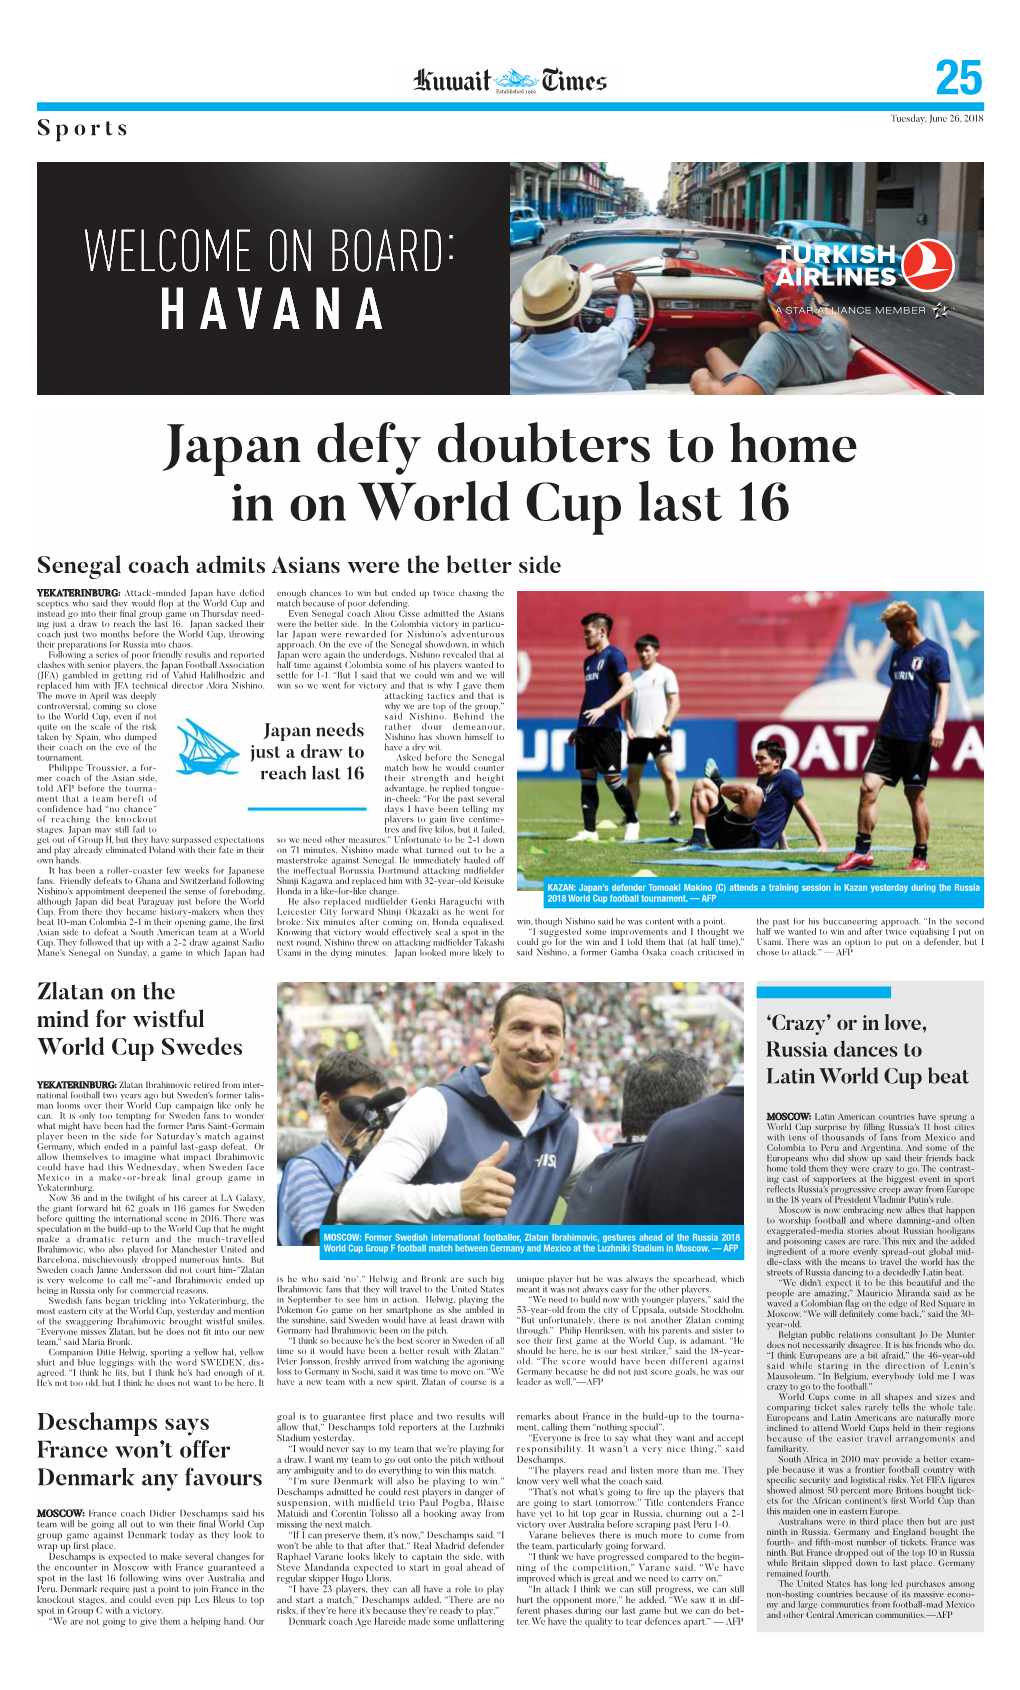 Japan Defy Doubters to Home in on World Cup Last 16 Senegal Coach Admits Asians Were the Better Side